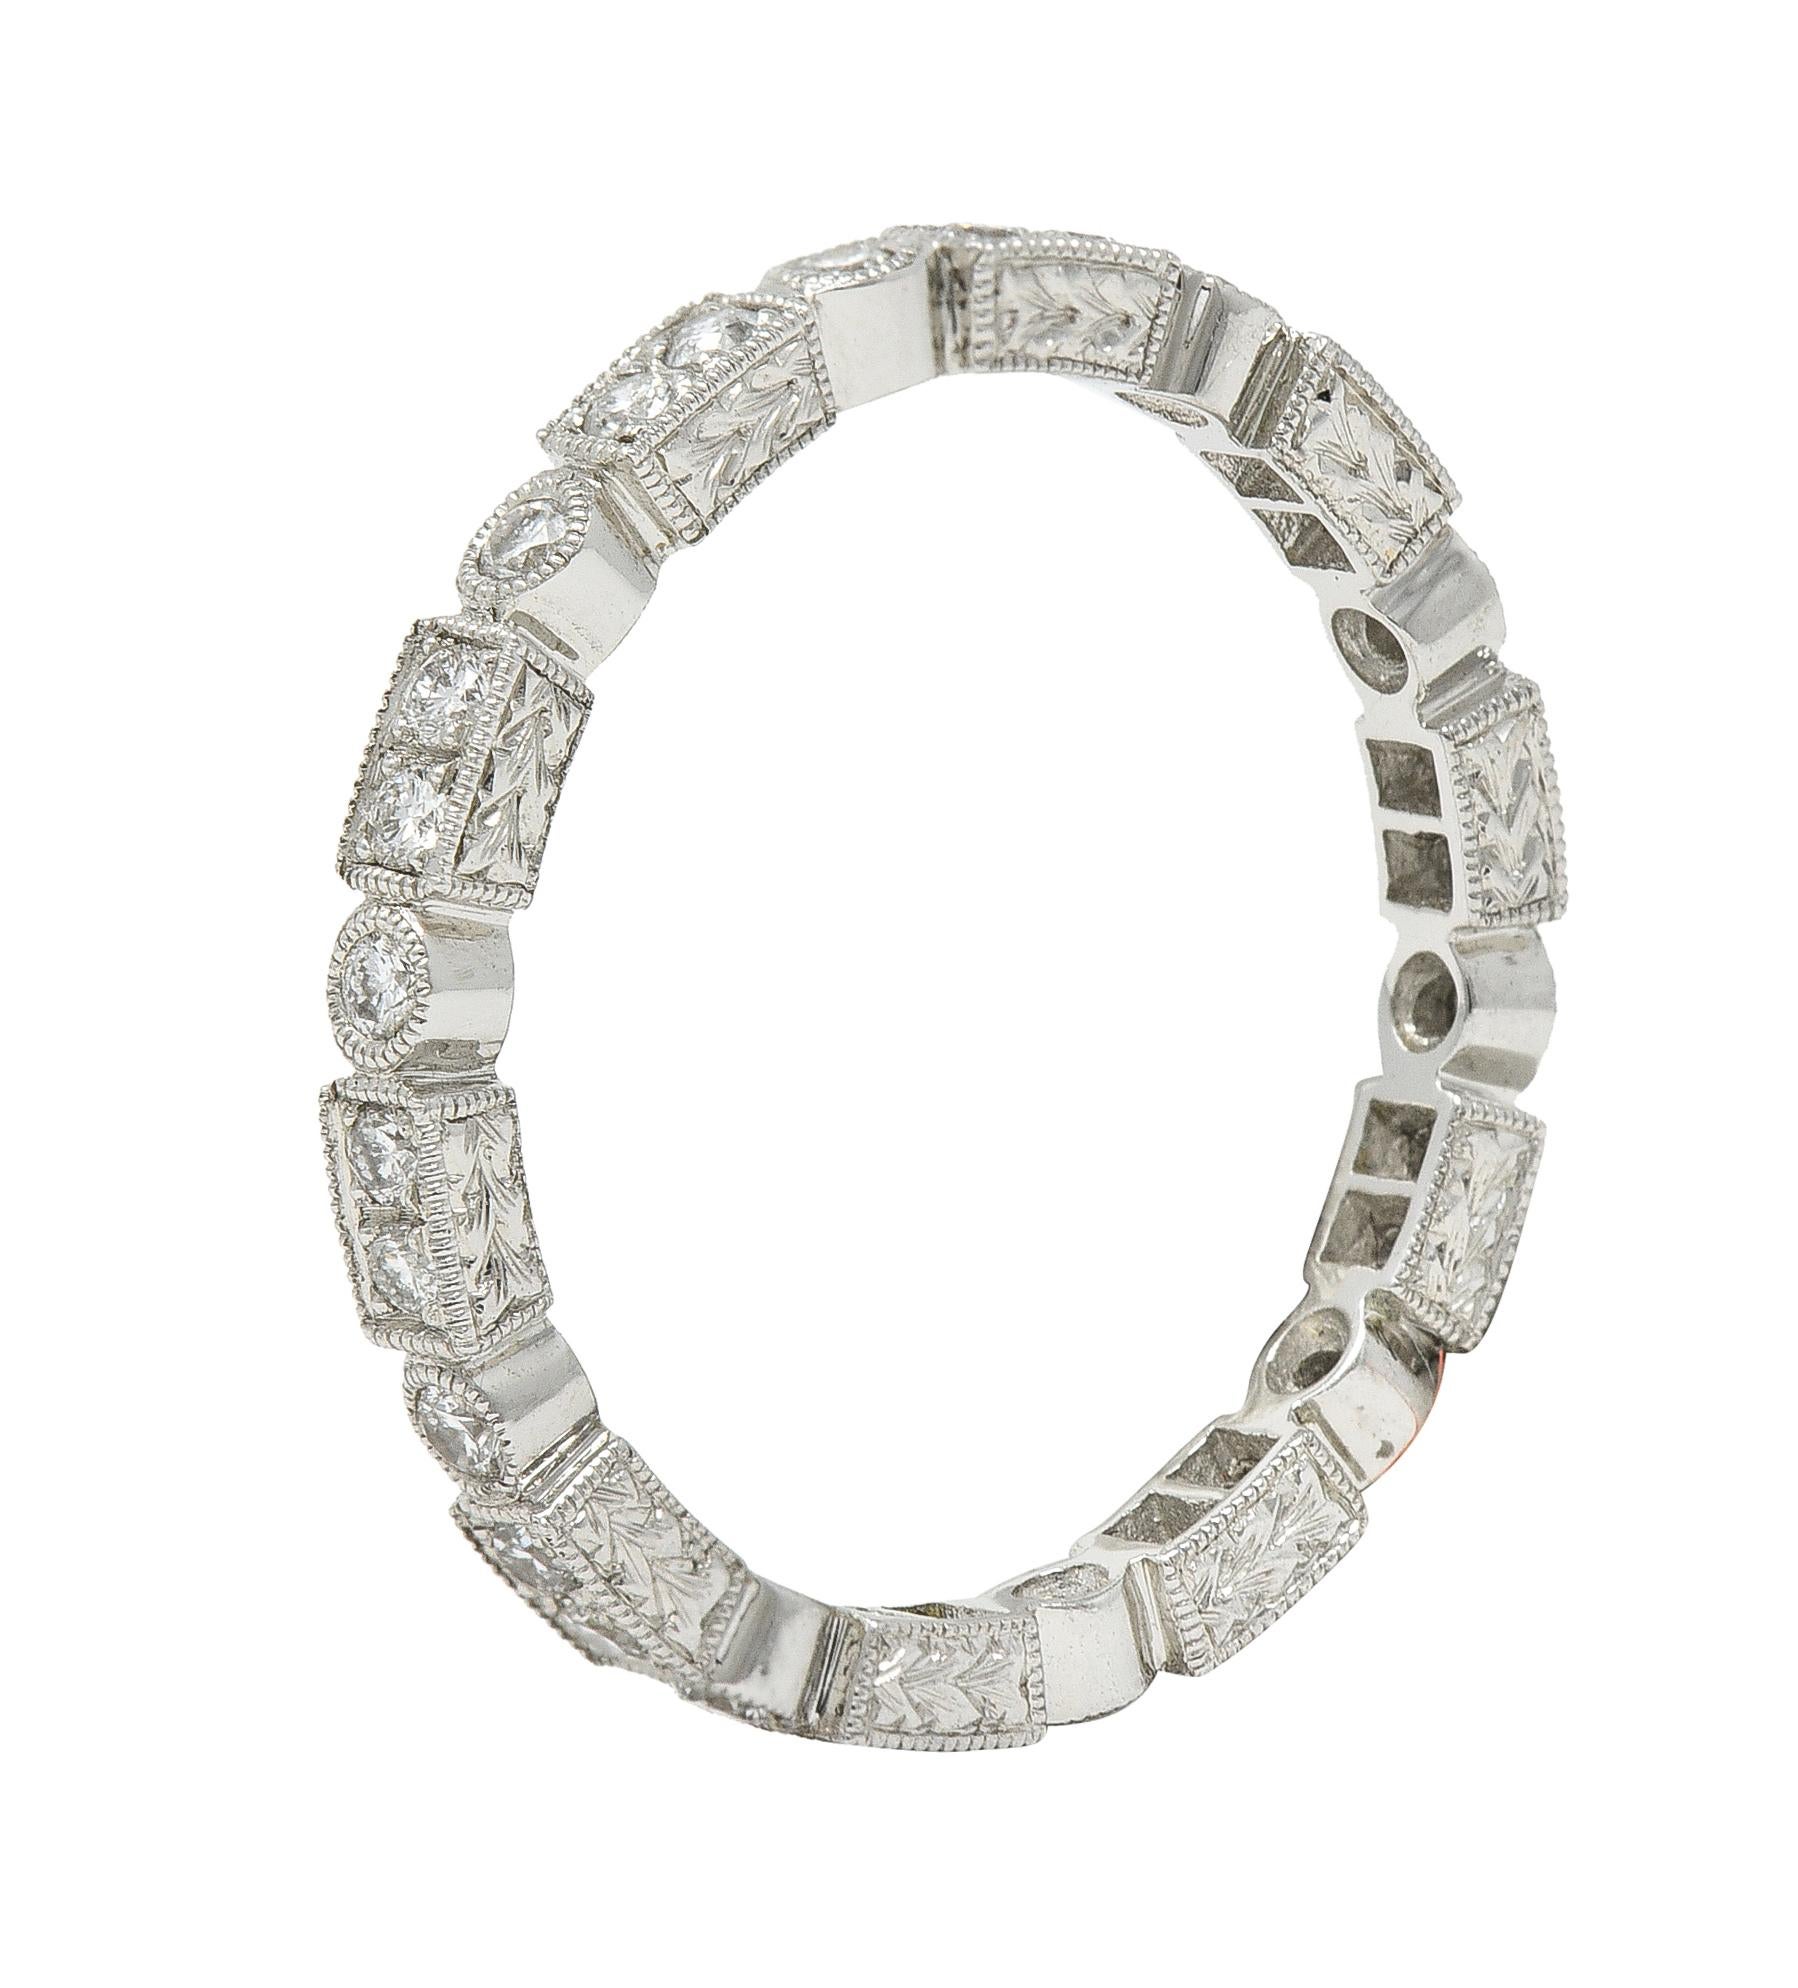 Eternity band ring is designed as a geometric pattern with milgrain
Rectangular forms alternate with circular forms while accented by round brilliant cut diamonds
Weighing in total approximately 0.50 carat with G/H color and VS clarity
Completed by